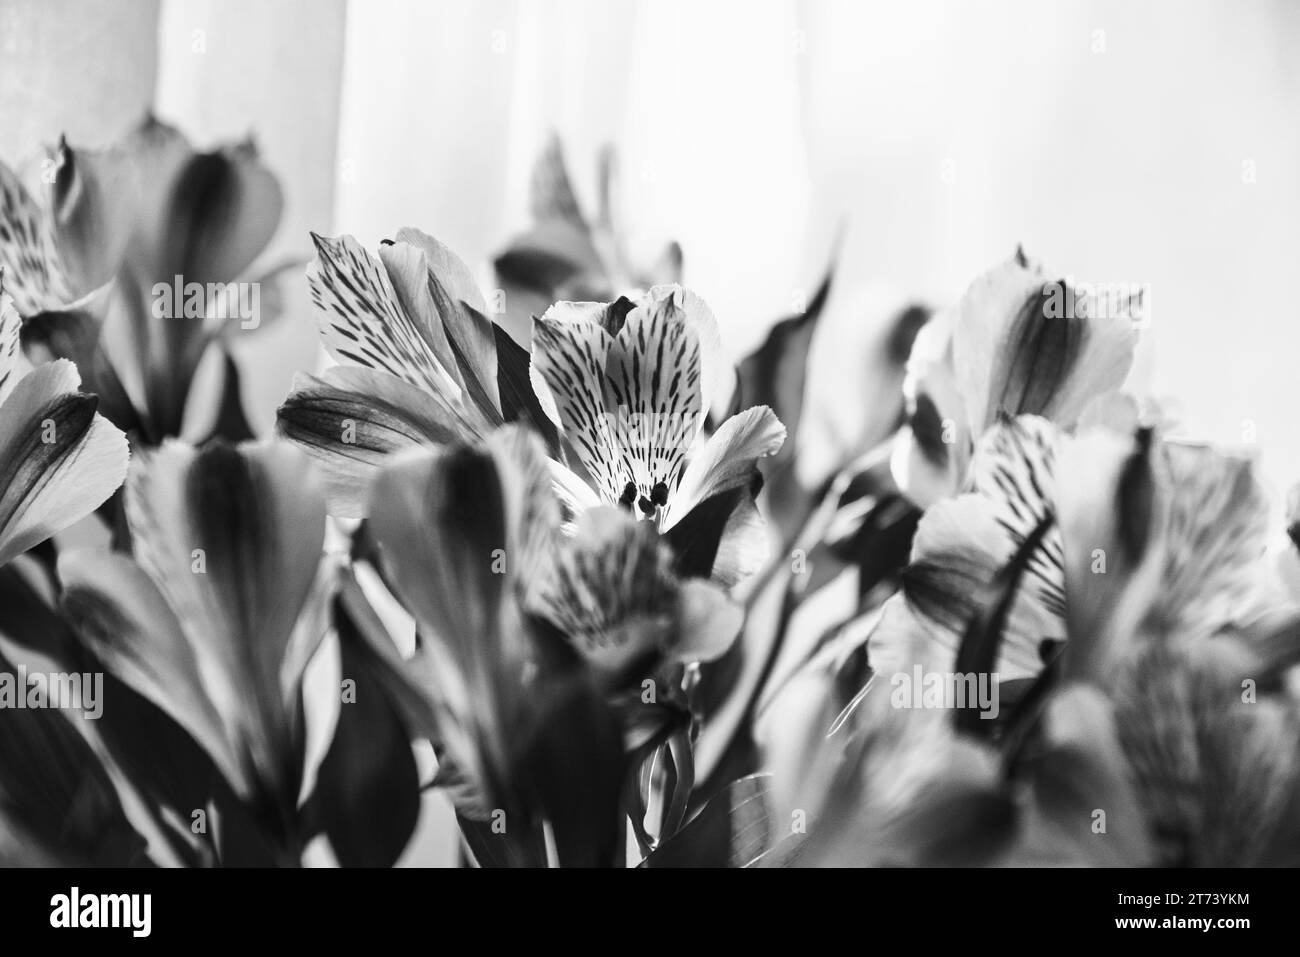 Beautiful lily flowers with window curtain at background. Funeral flowers background. Grief, memorial, mourning concepts. Black white photography. Stock Photo